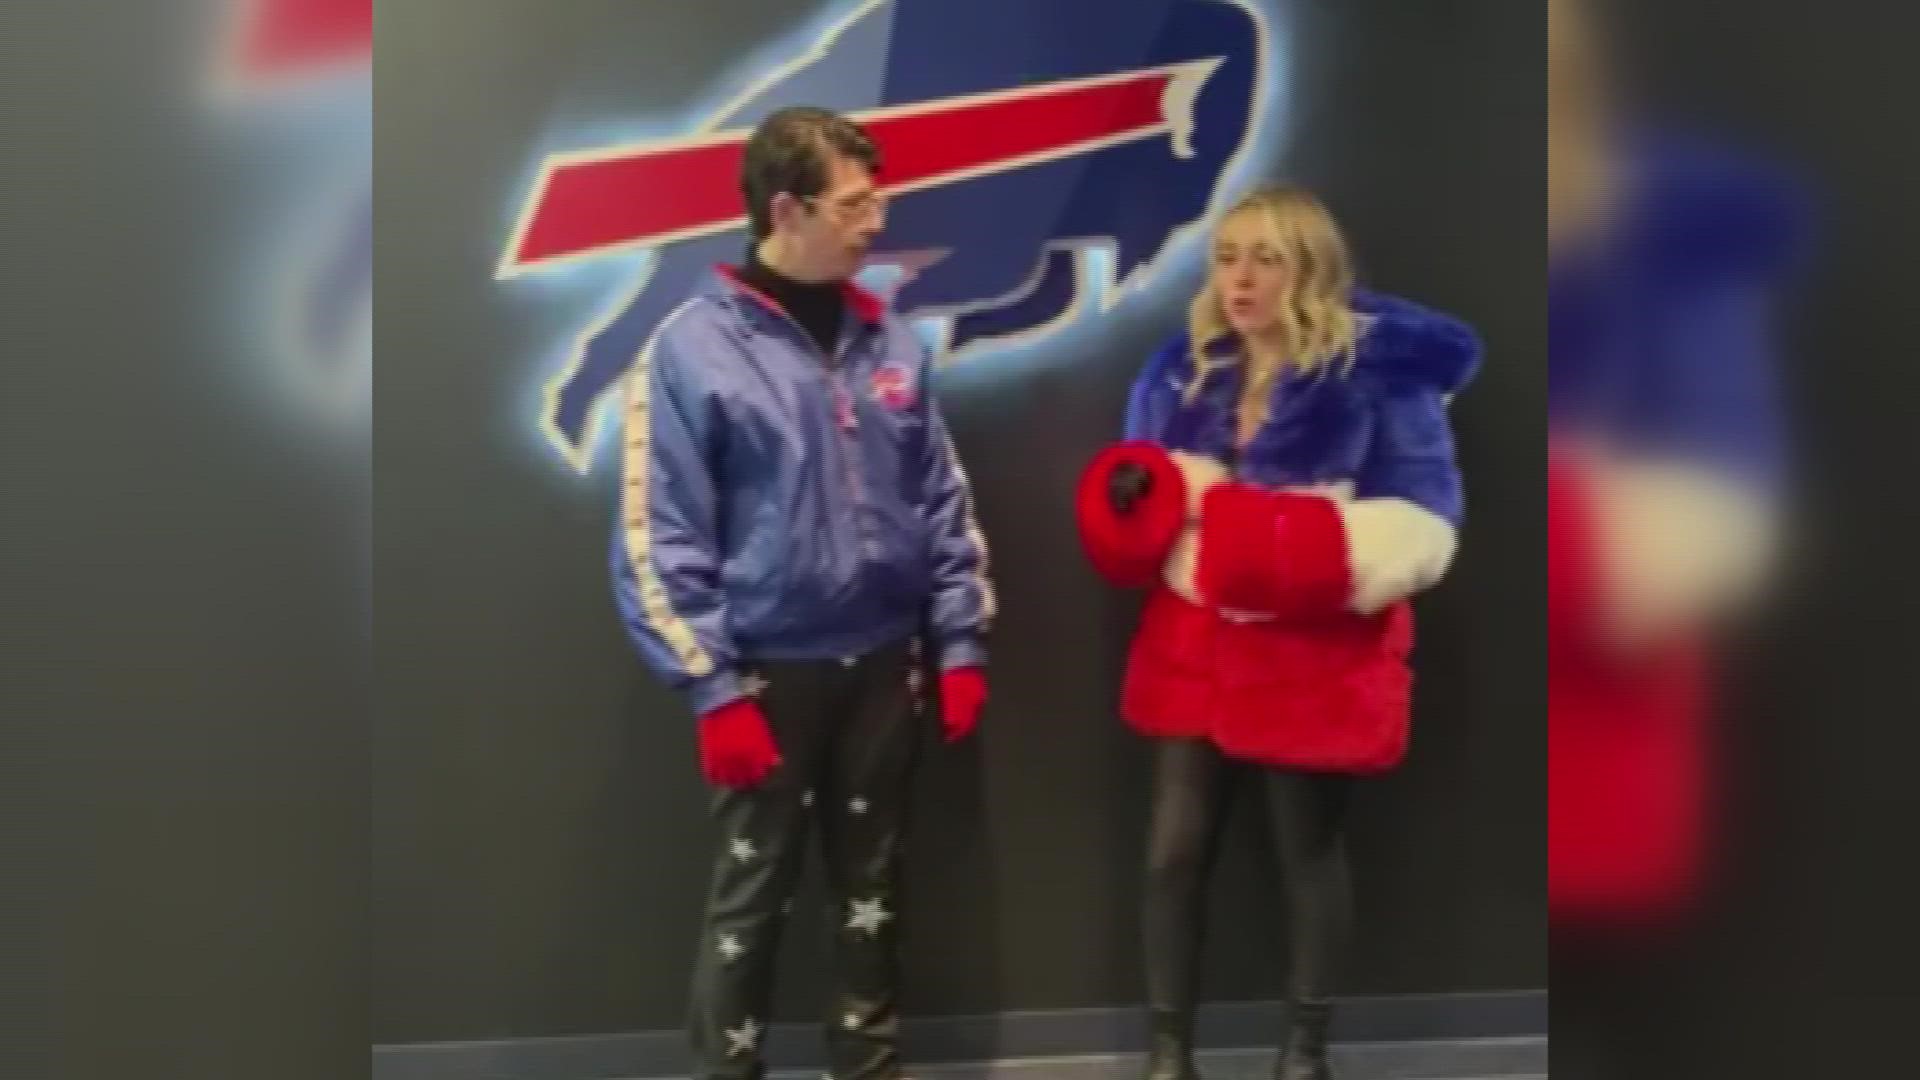 Joshua Vacanti and Cami Clune rehearse the national anthem ahead of the Bills playoff game.